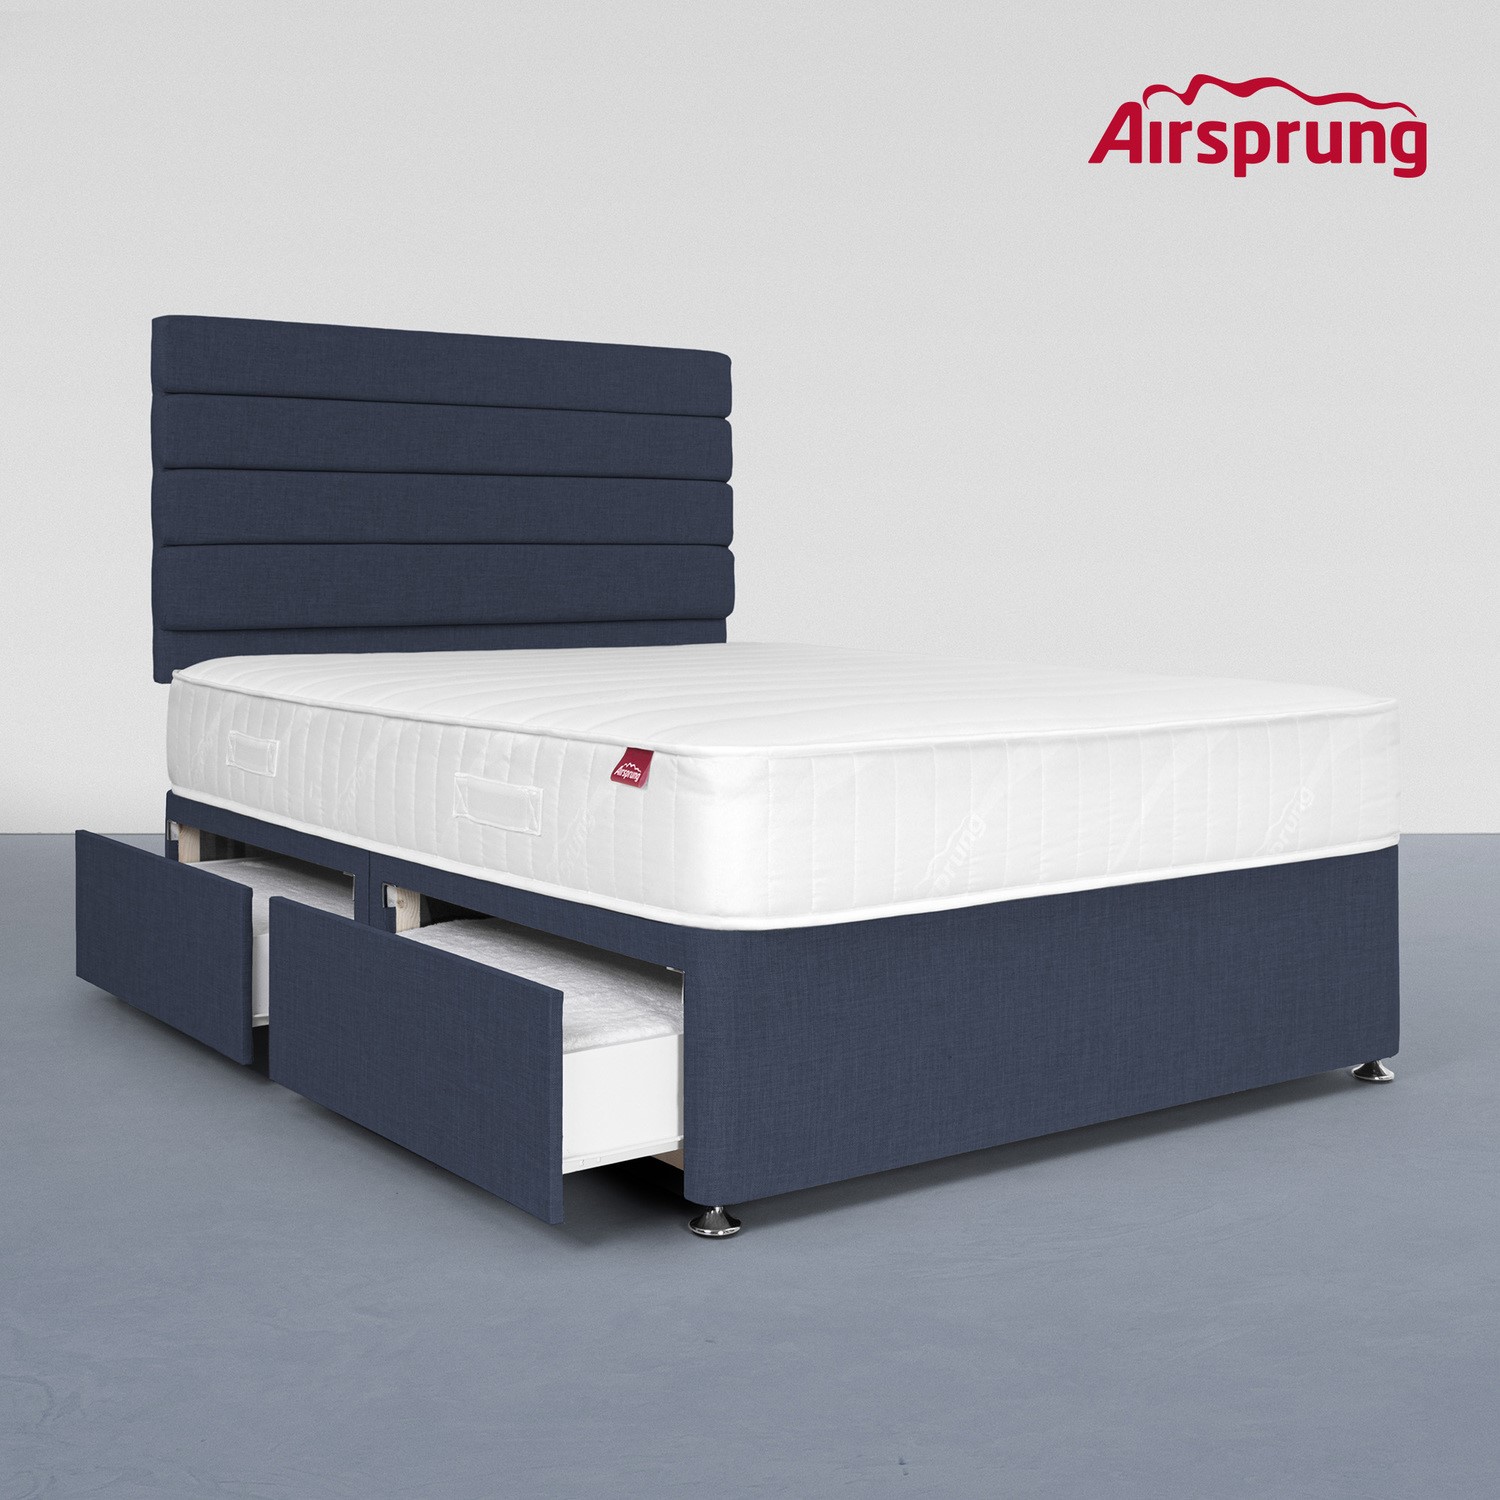 Read more about Airsprung double 4 drawer divan bed with comfort mattress midnight blue